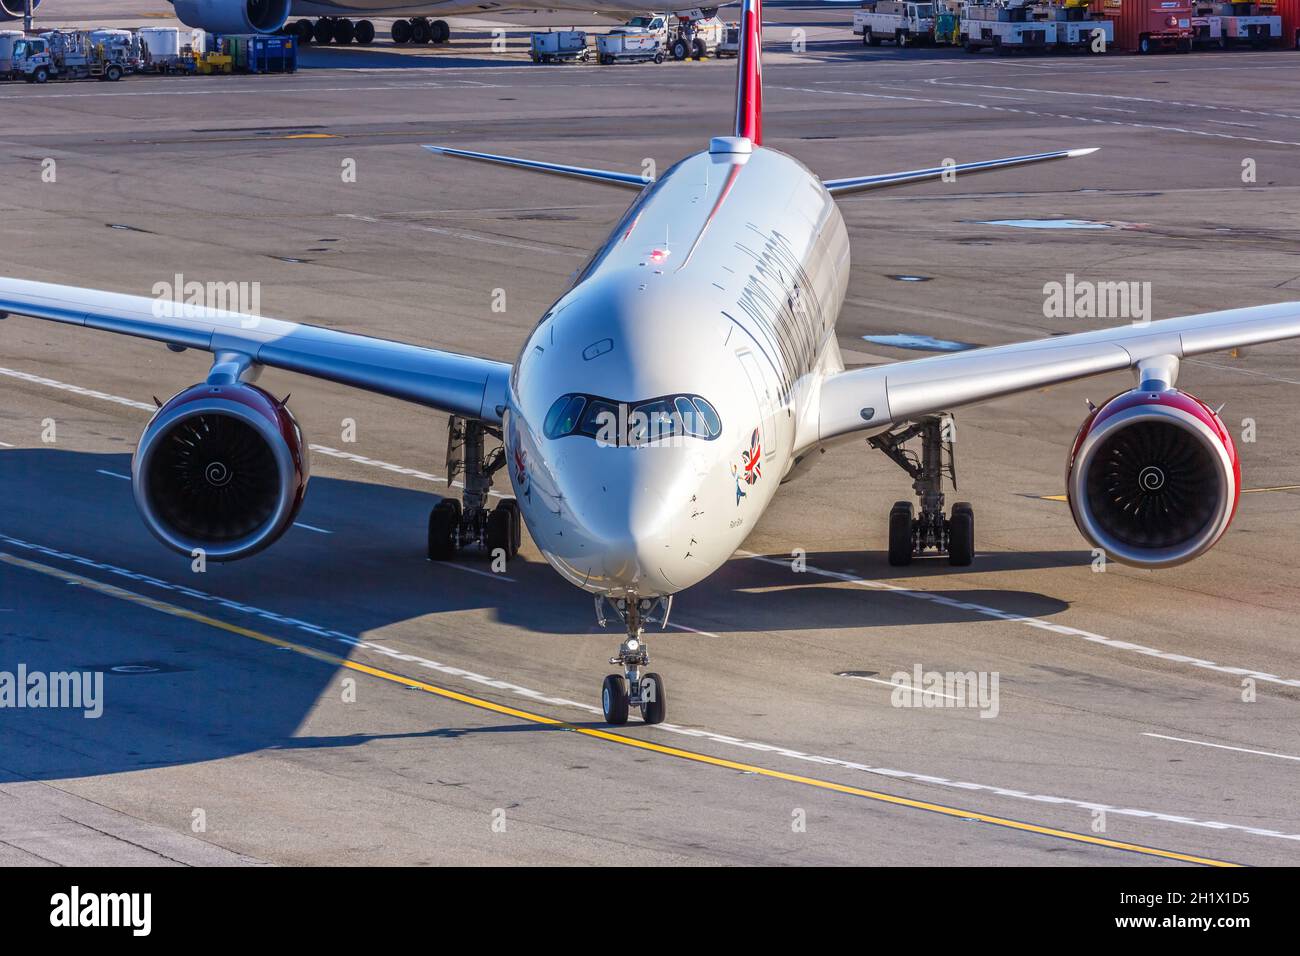 New York City, New York - February 27, 2020: Virgin Atlantic Airbus A350-1000 airplane at New York JFK Airport in the United States. Stock Photo